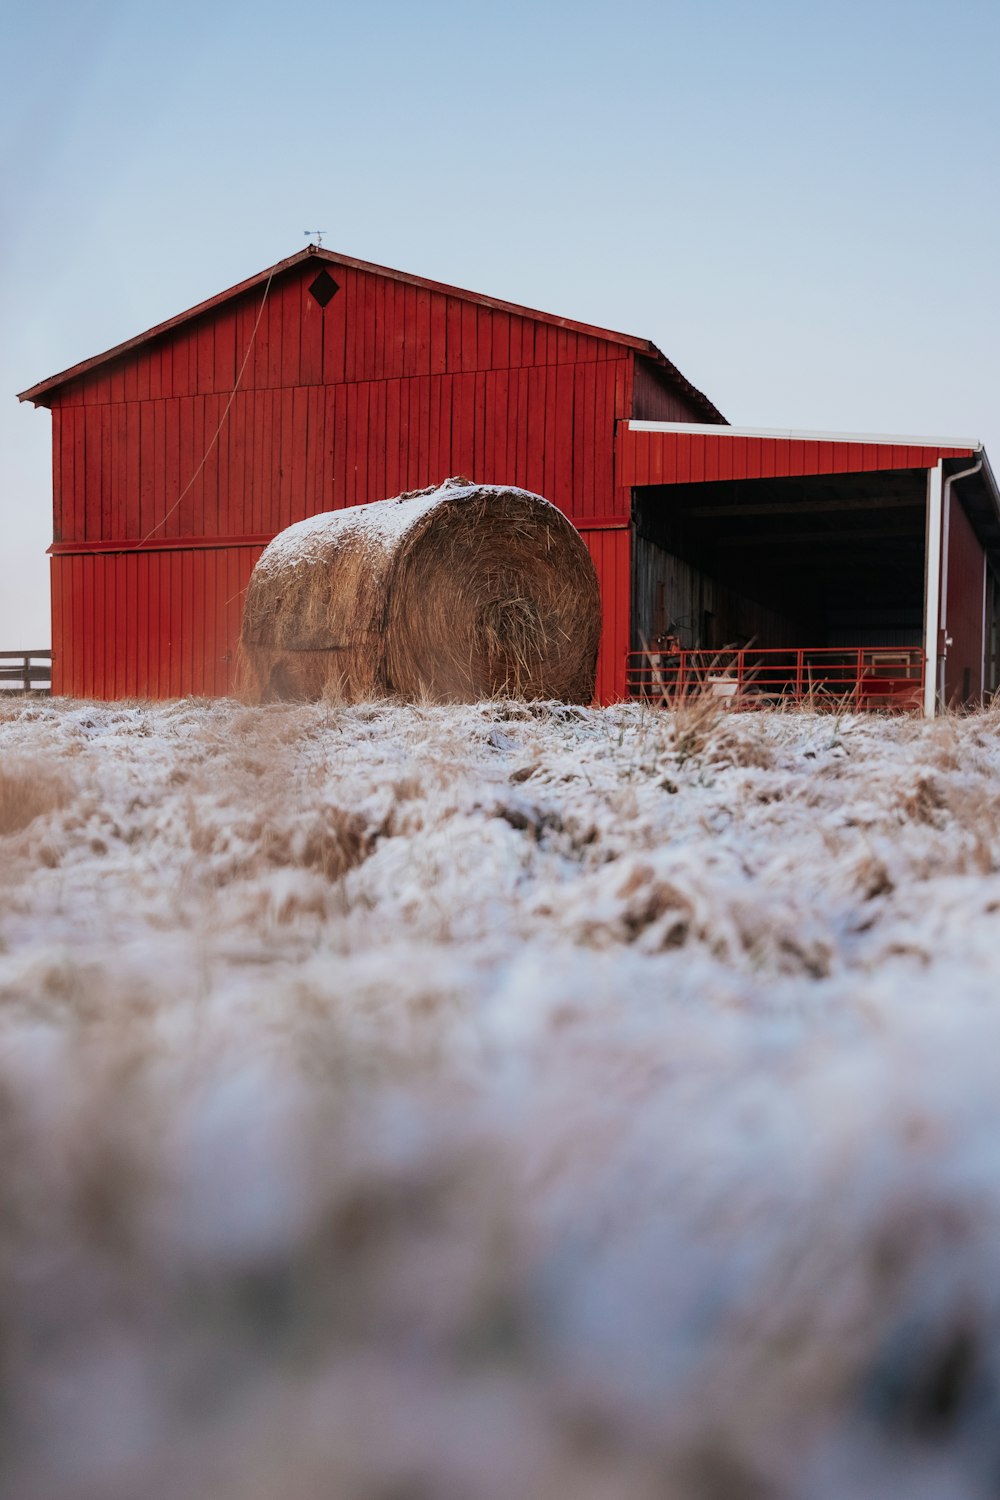 a red barn with hay bales in front of it